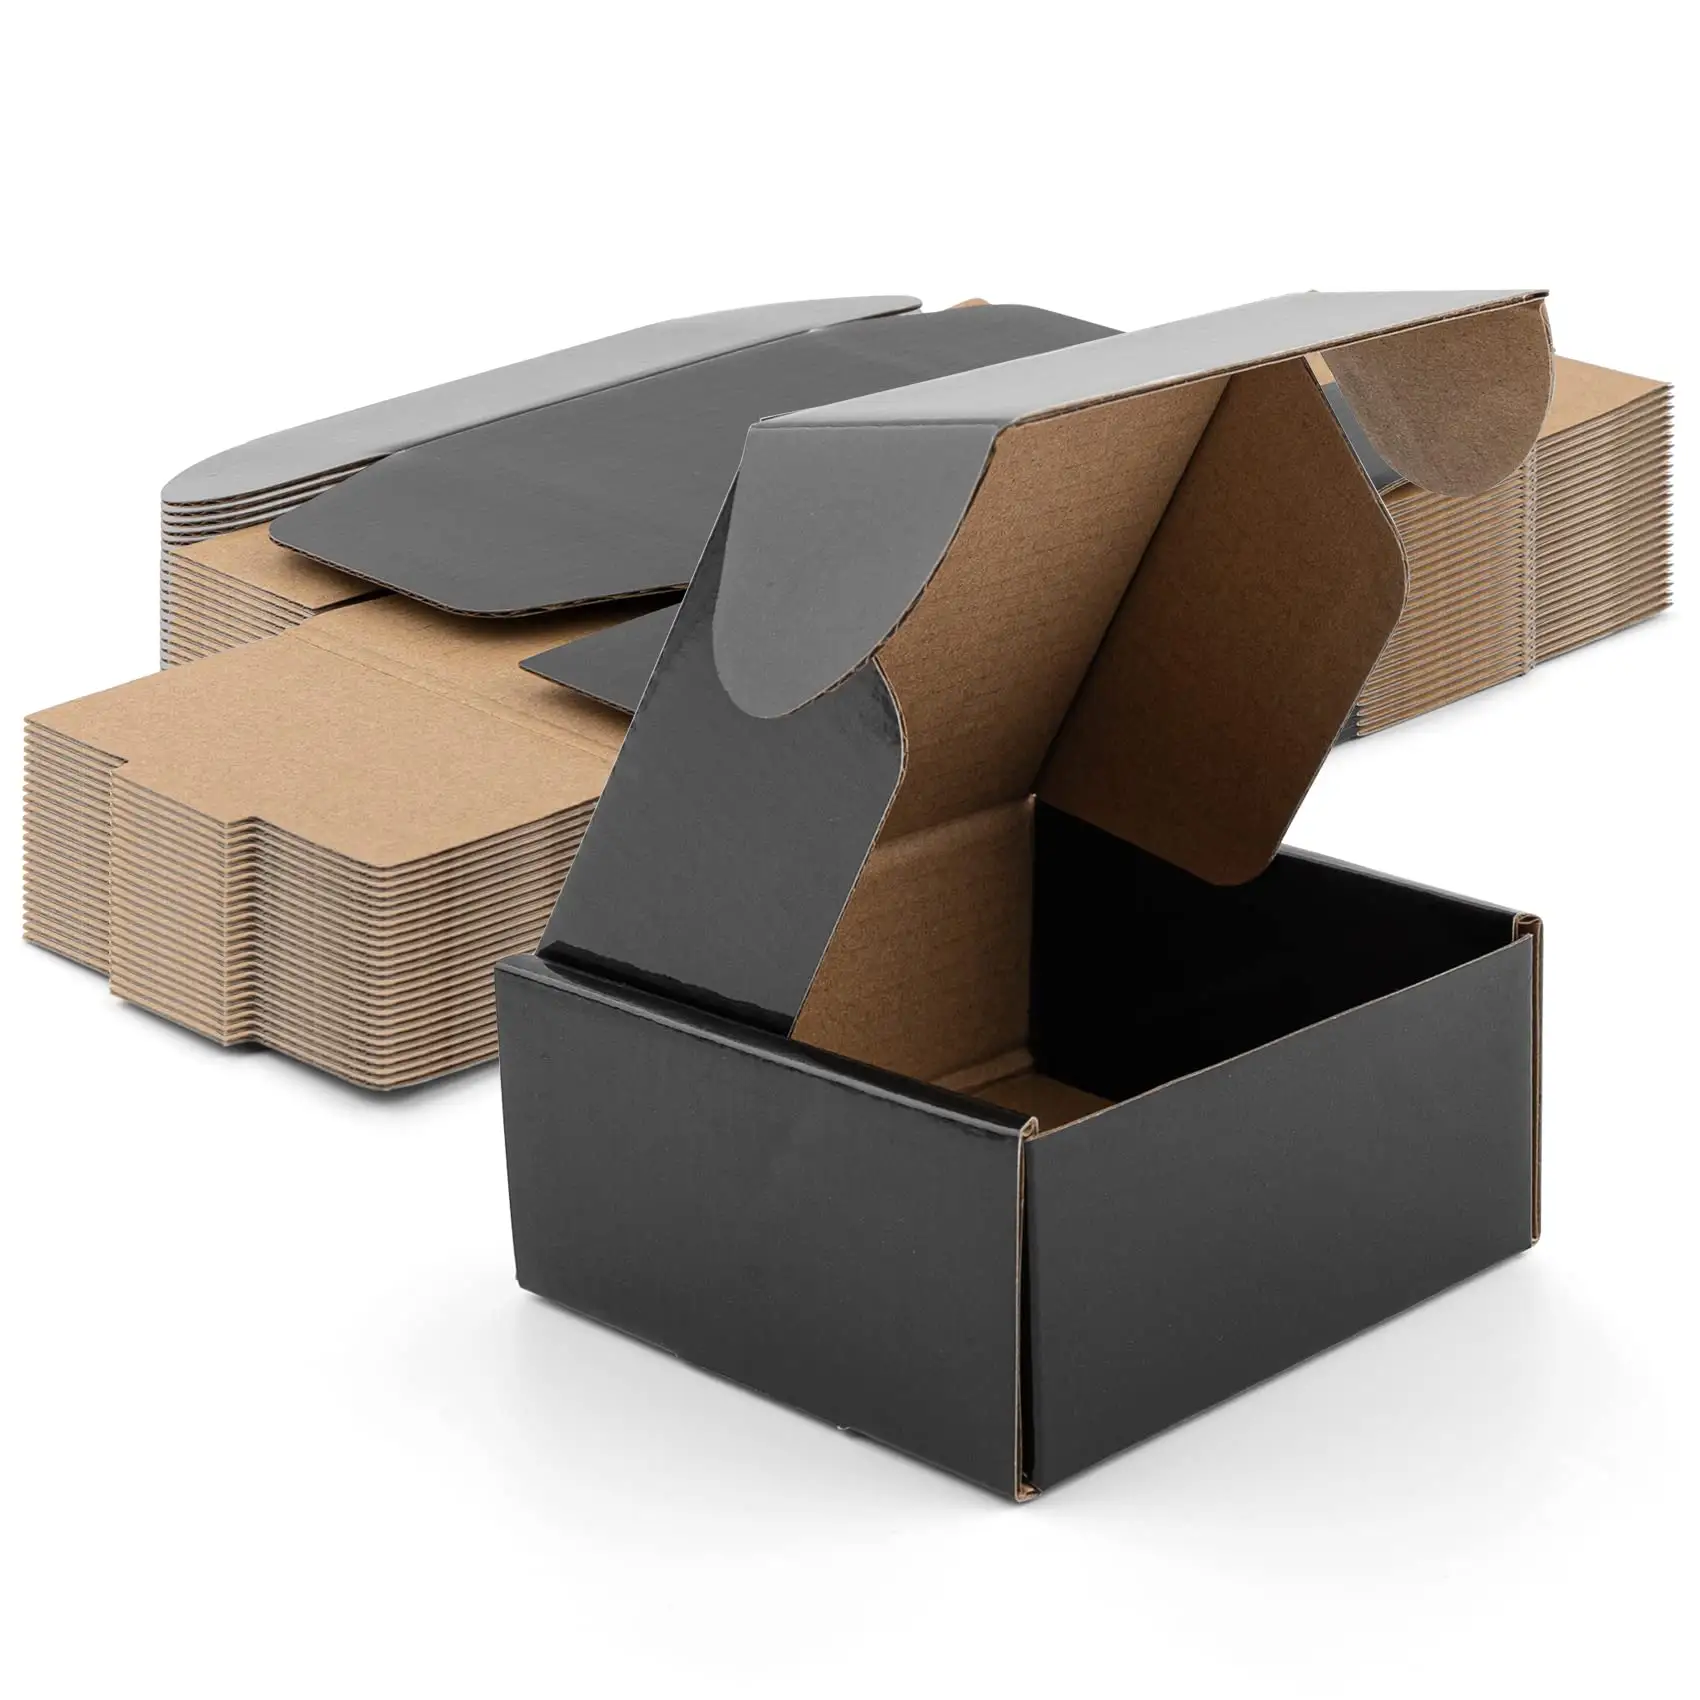 Wholesale Customized Black Shipping Boxes Are Suitable For Corrugated Mailboxes For Small Businesses For Transportation